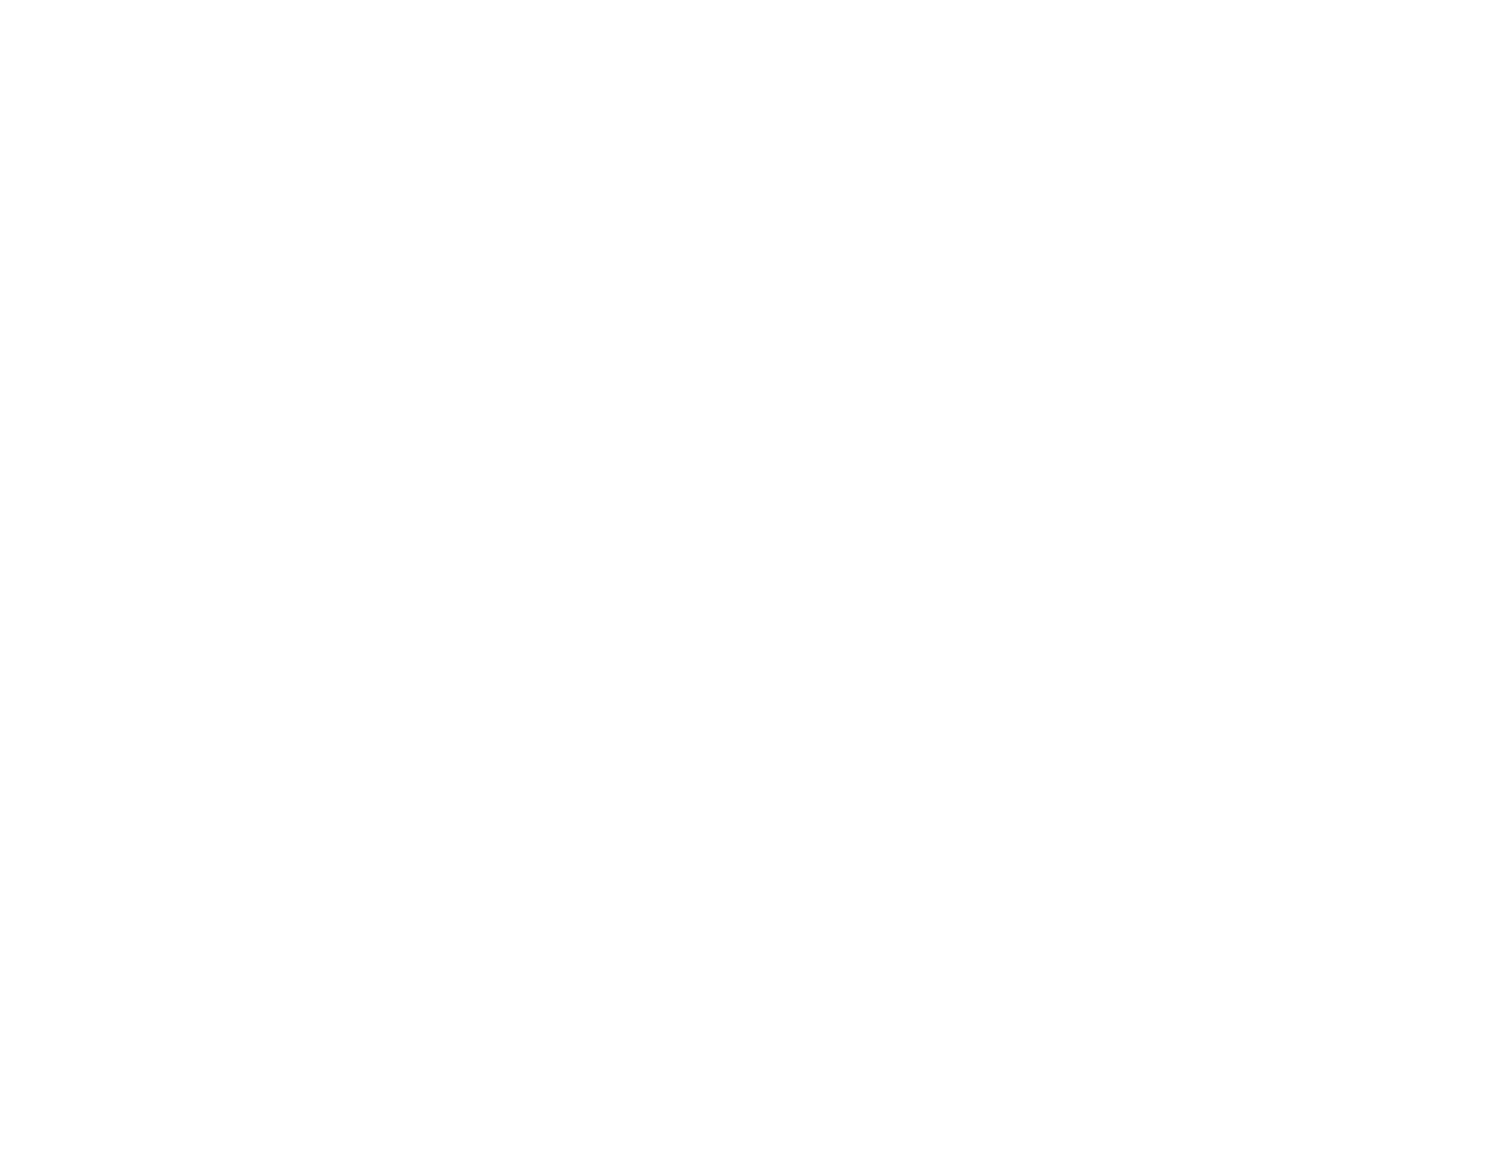 A &amp; A Wall Systems